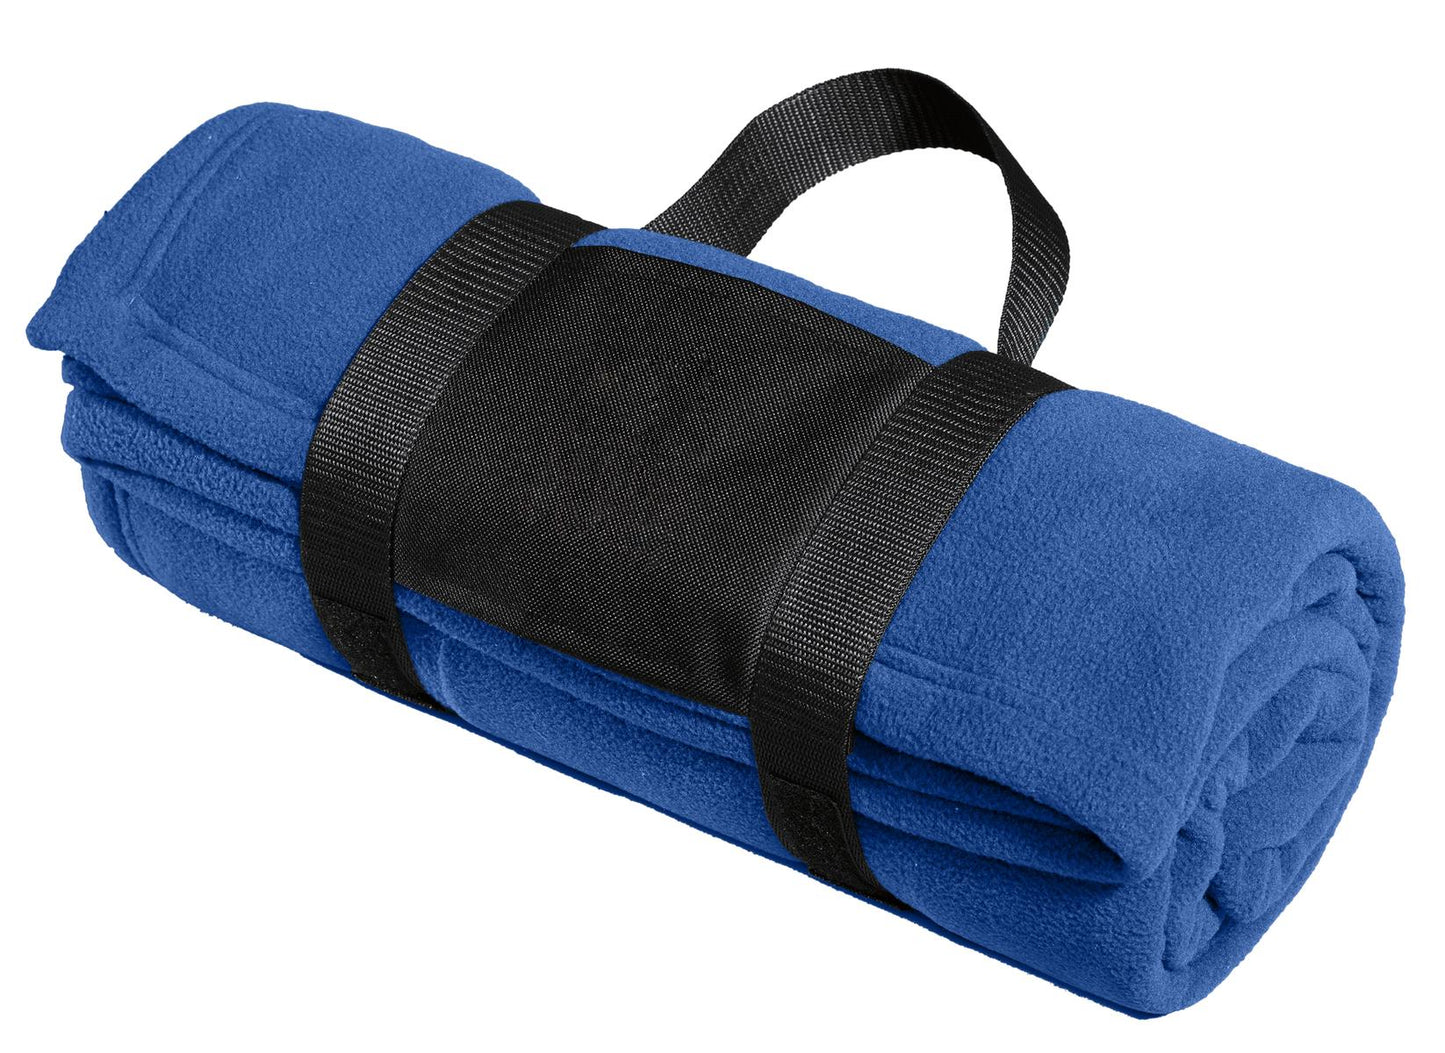 Port Authority® Fleece Blanket with Carrying Strap. BP20 - DFW Impression